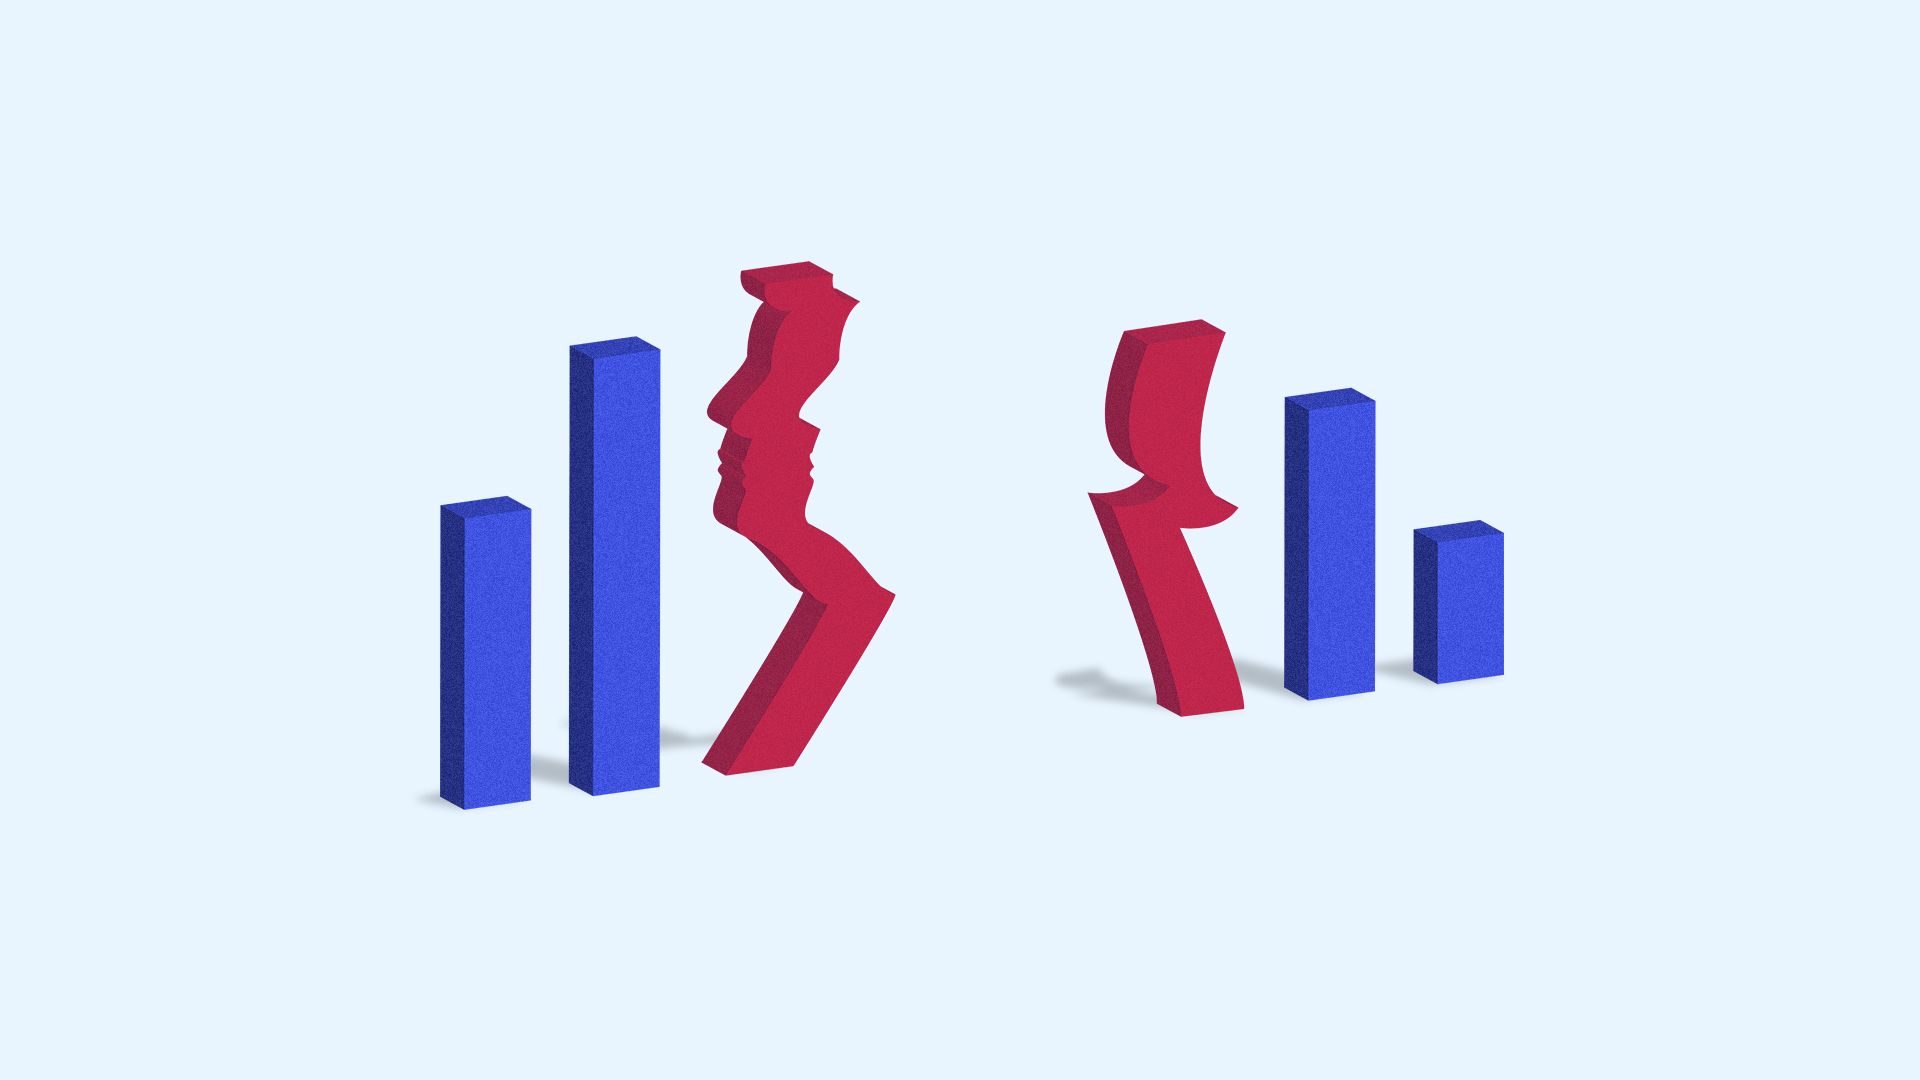 Illustration of a bar chart with Trump's silhouette in the middle 